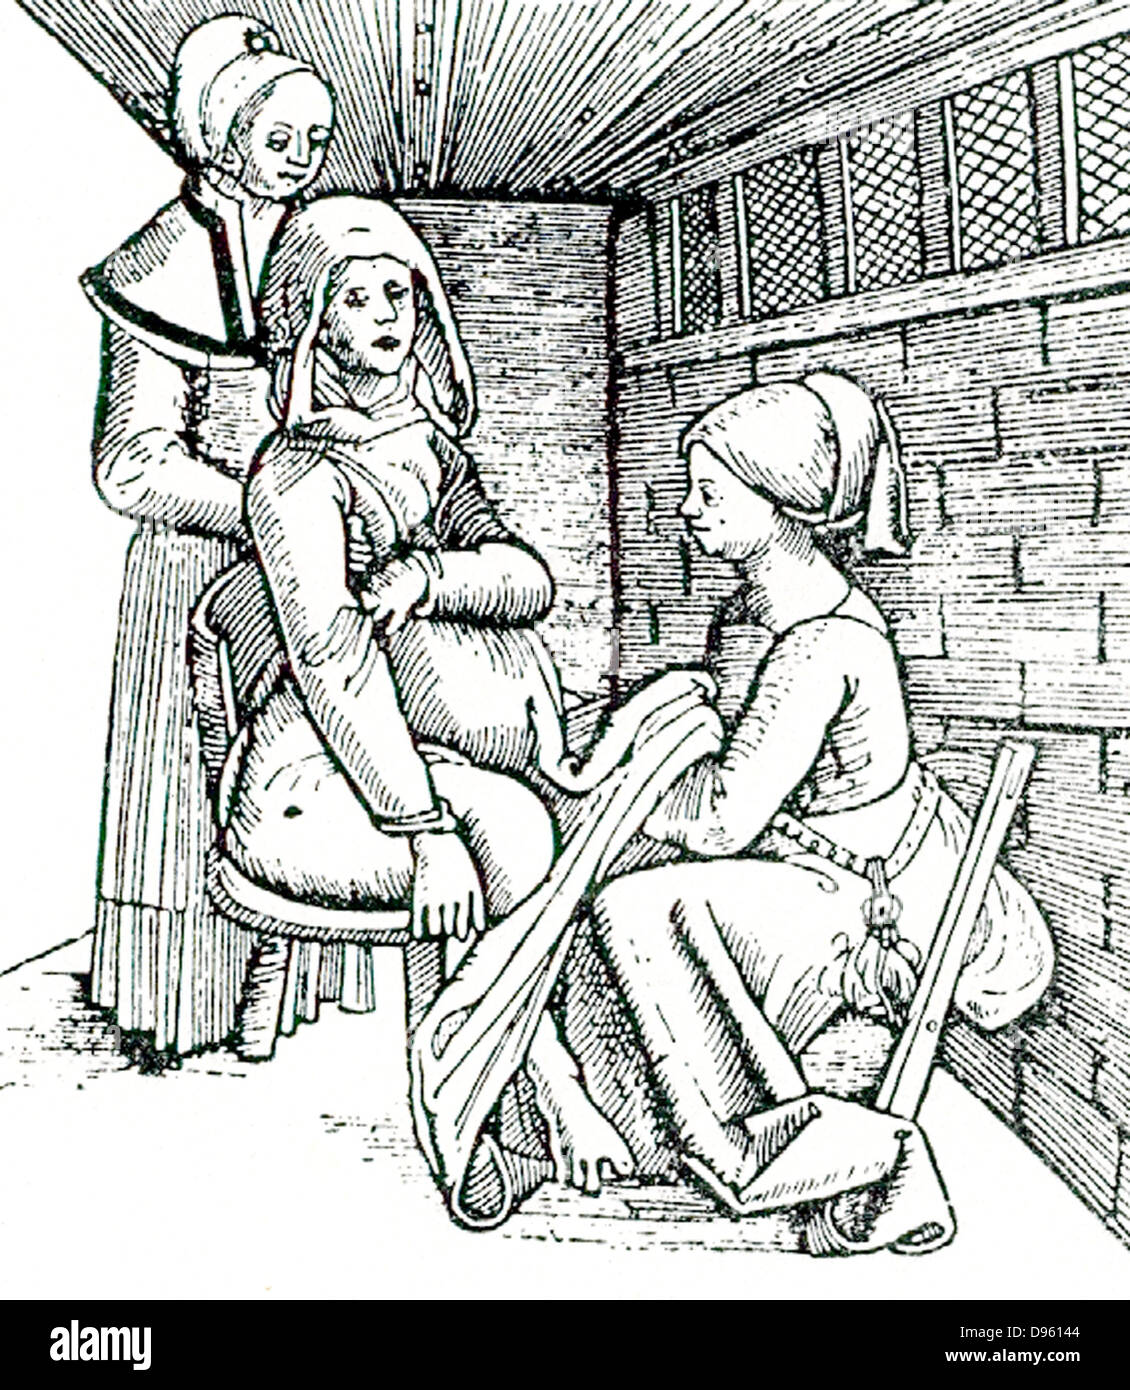 Birthing chair in use. Midwife works underneath the mother's clothing while her assistant supports the mother from behind. 16th century woodcut from Eucharius Roslin 'The Garden of Roses'. Stock Photo